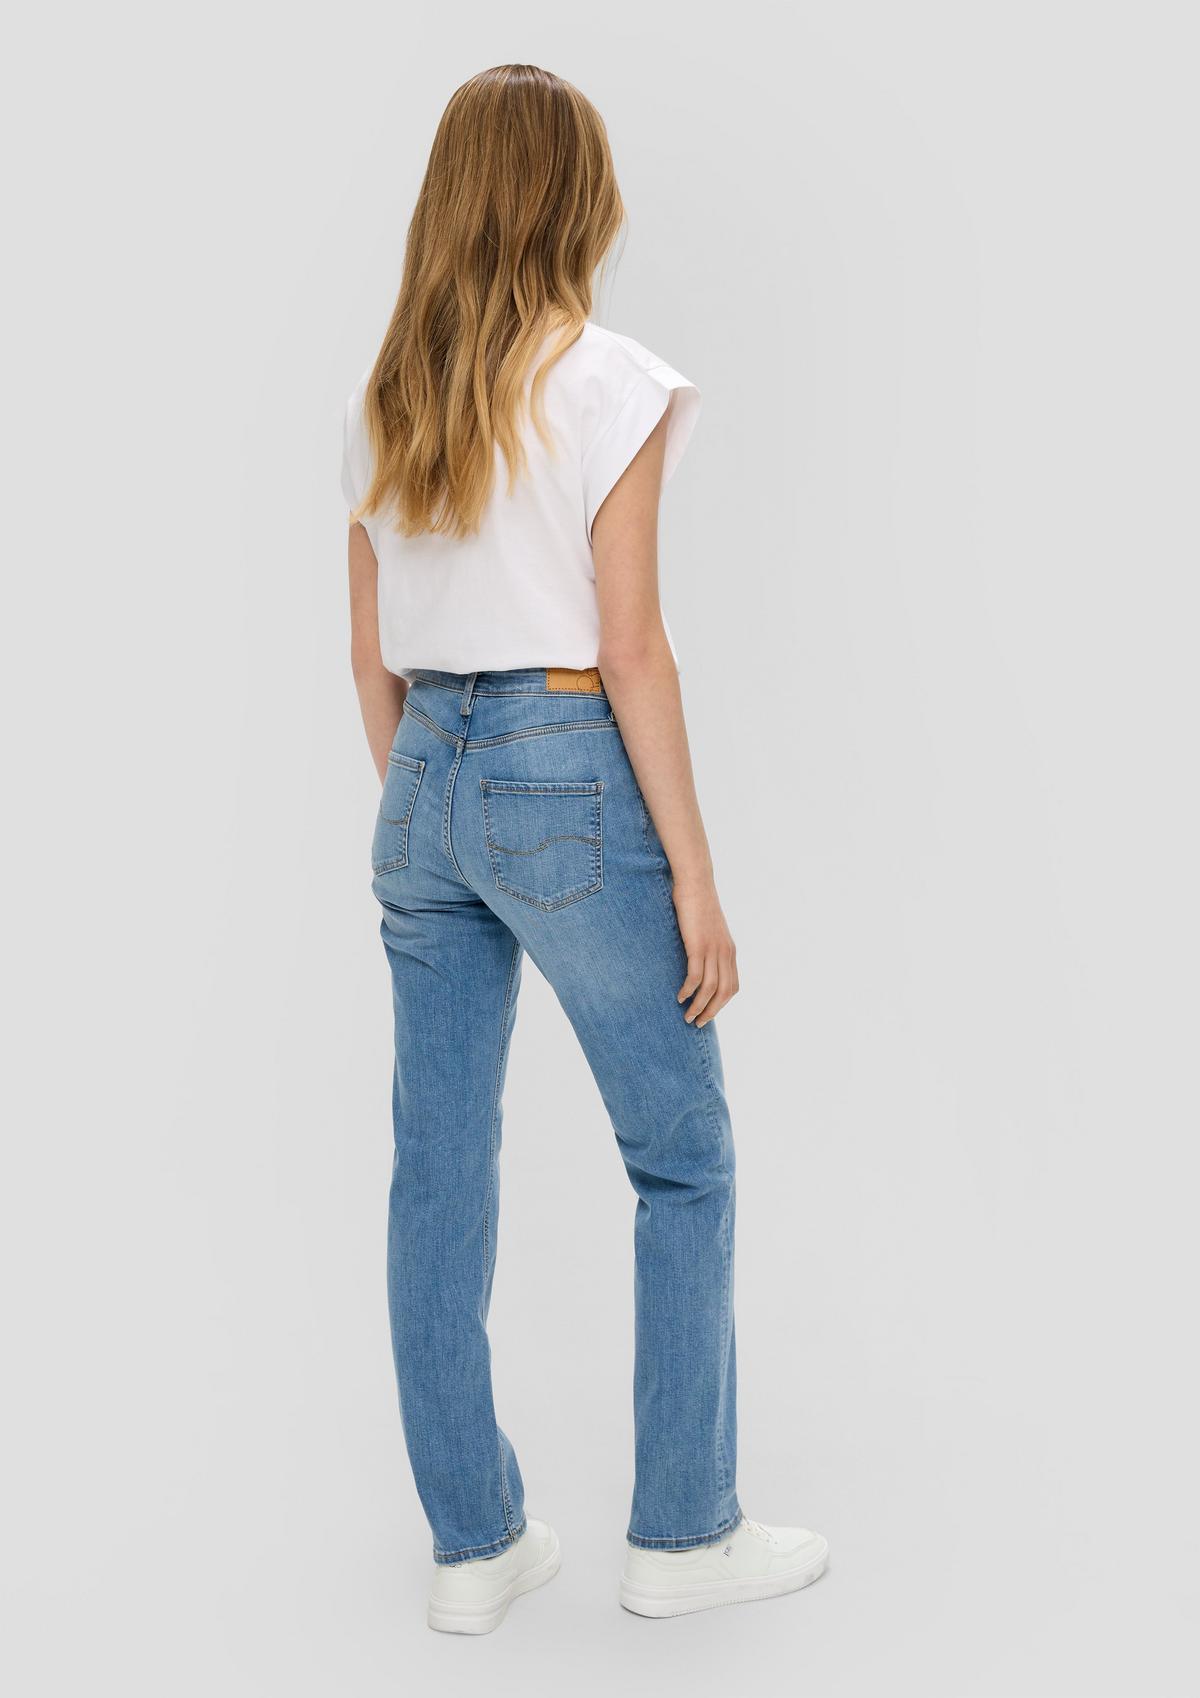 s.Oliver Jeans Catie / mid rise / straight leg